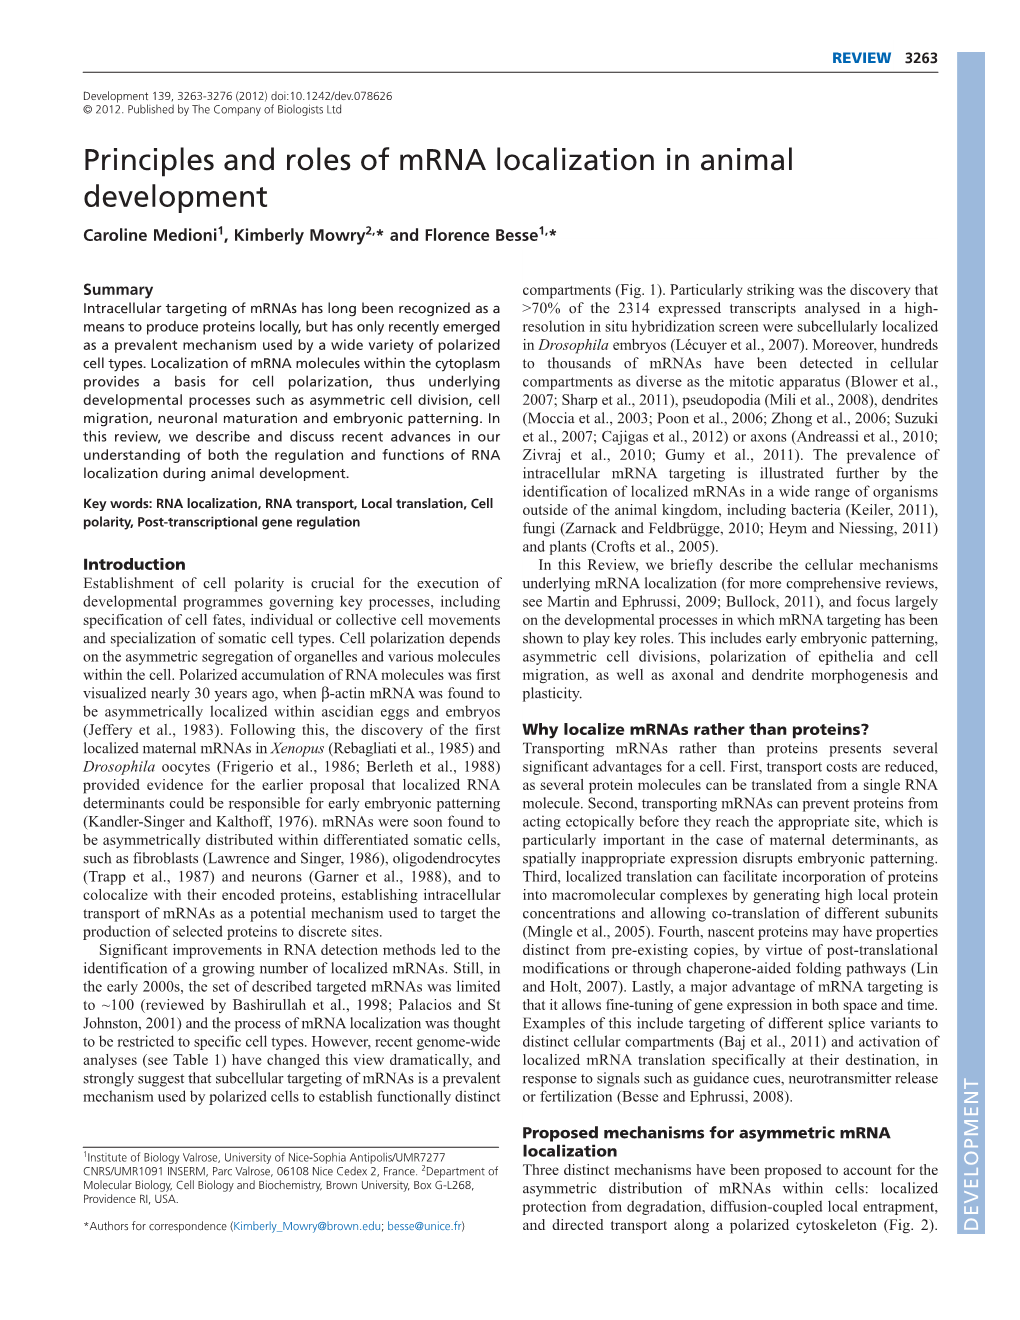 Principles and Roles of Mrna Localization in Animal Development Caroline Medioni1, Kimberly Mowry2,* and Florence Besse1,*